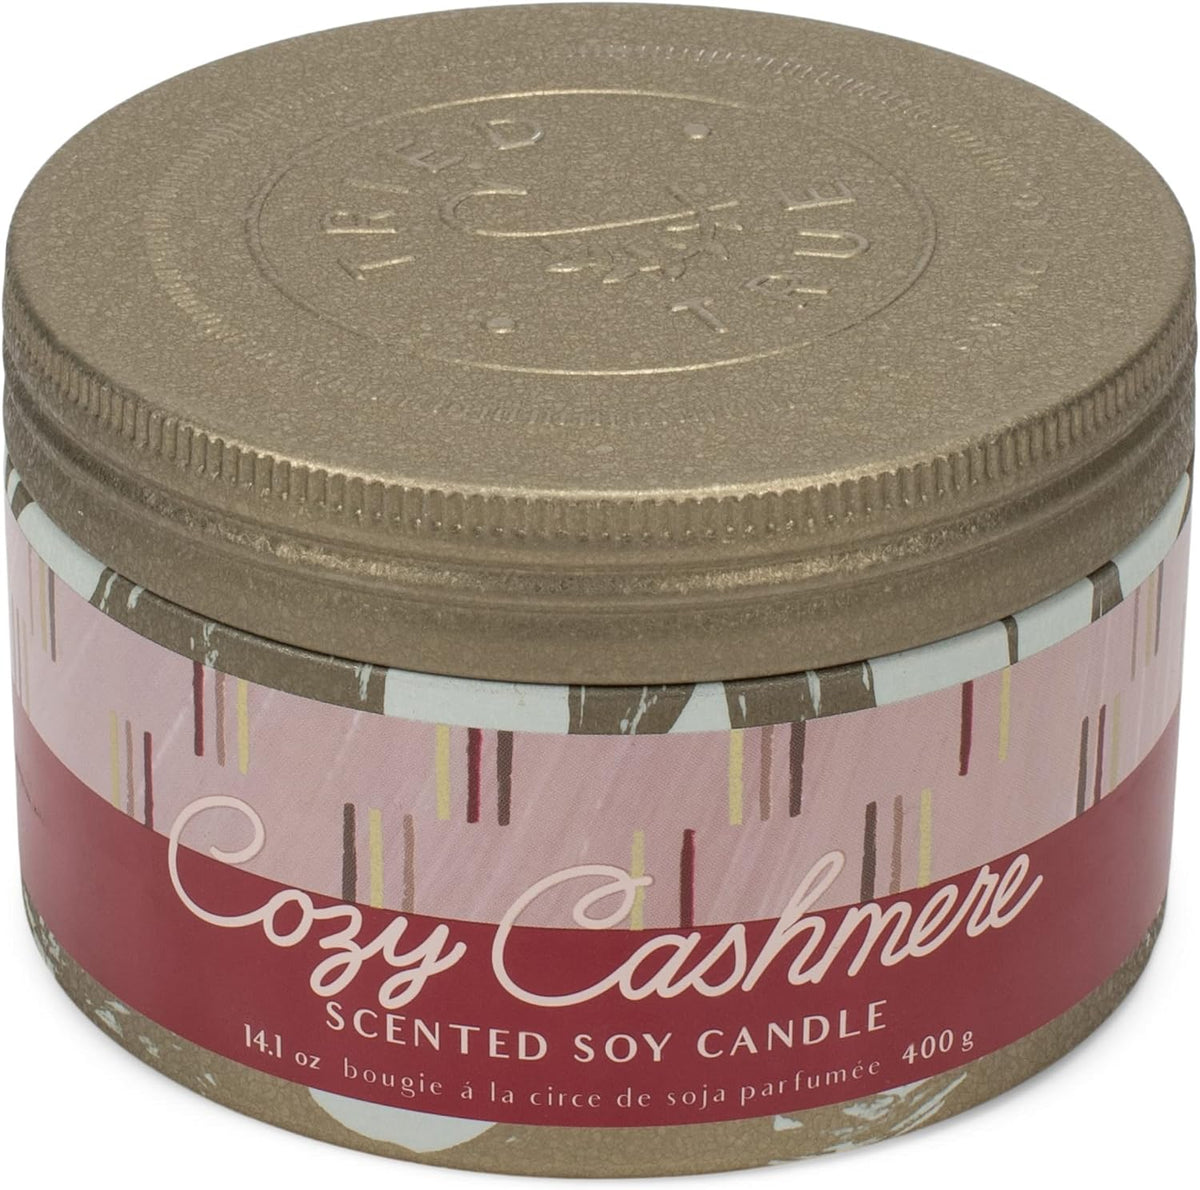 Cozy Cashmere Large Tried & True Tin Candle by Illume